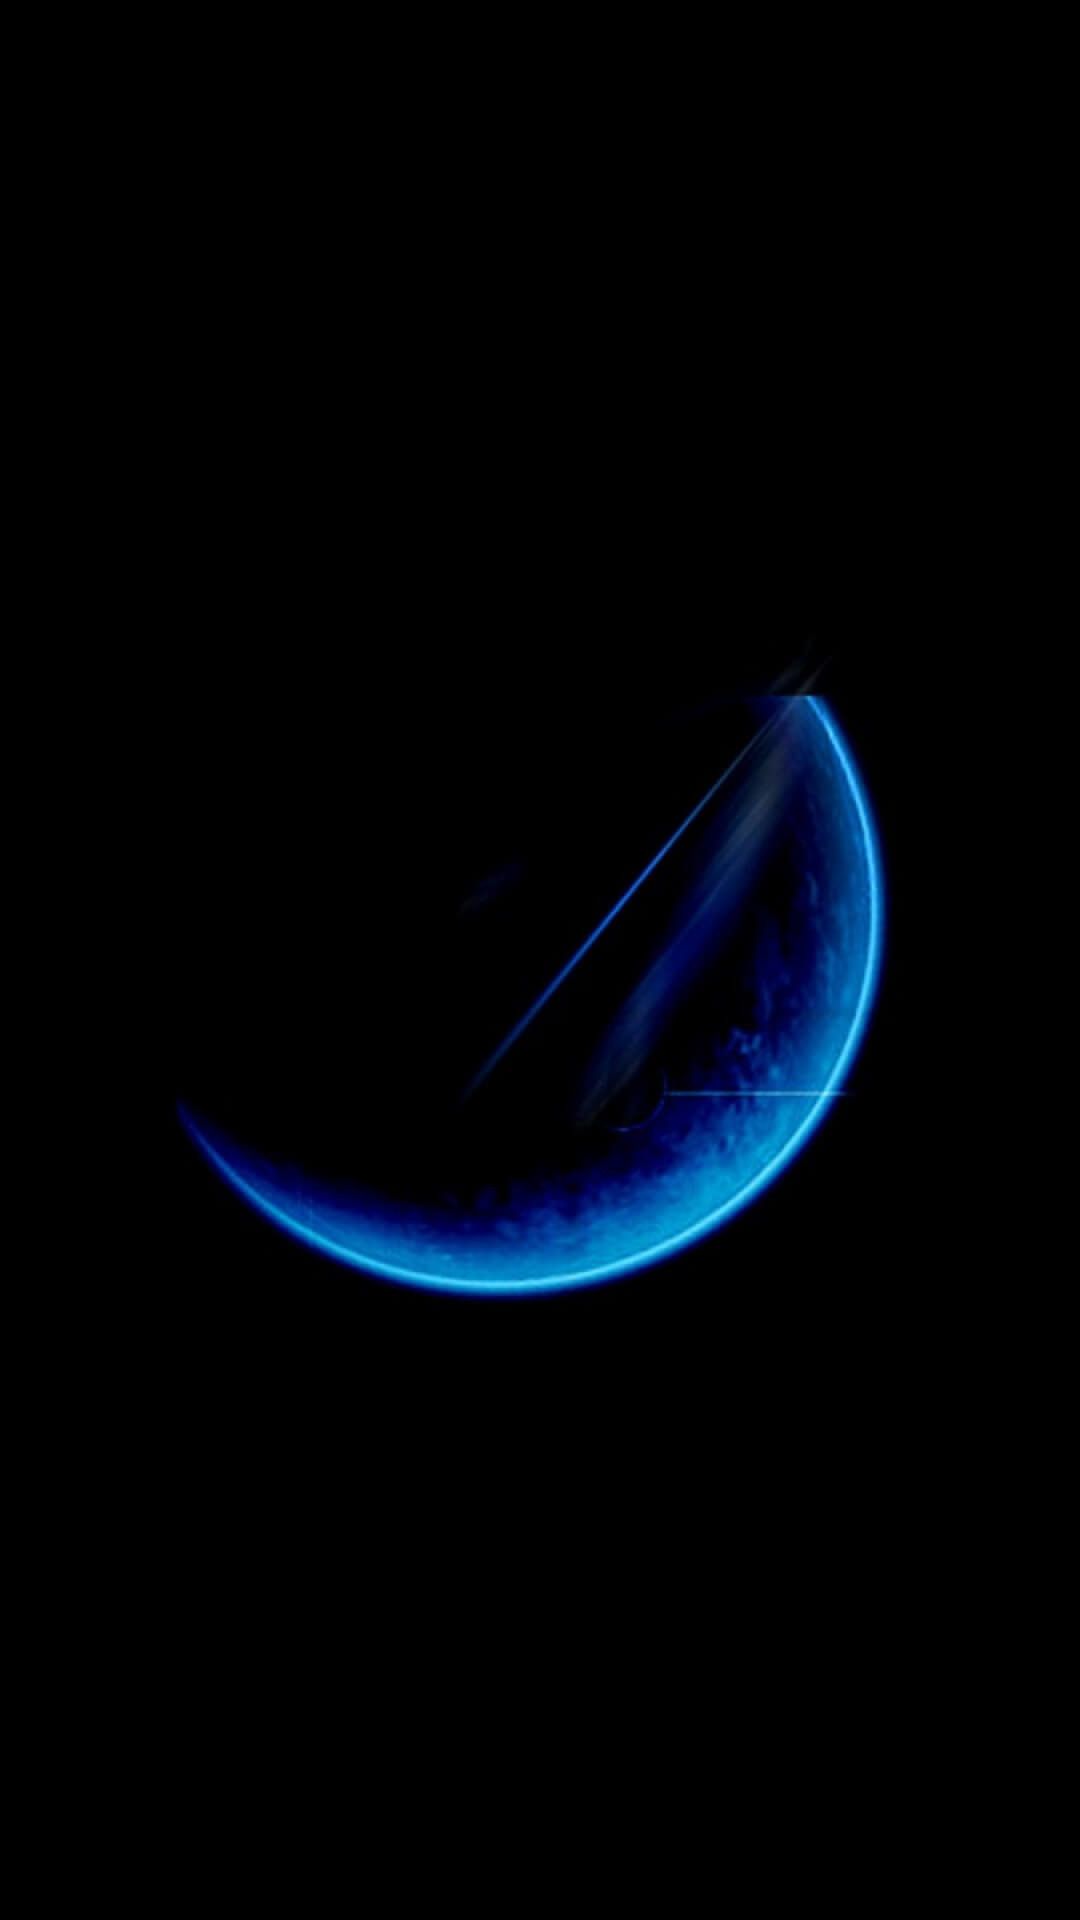 IPhone wallpaper with abstract blue shape on black background - Dark phone